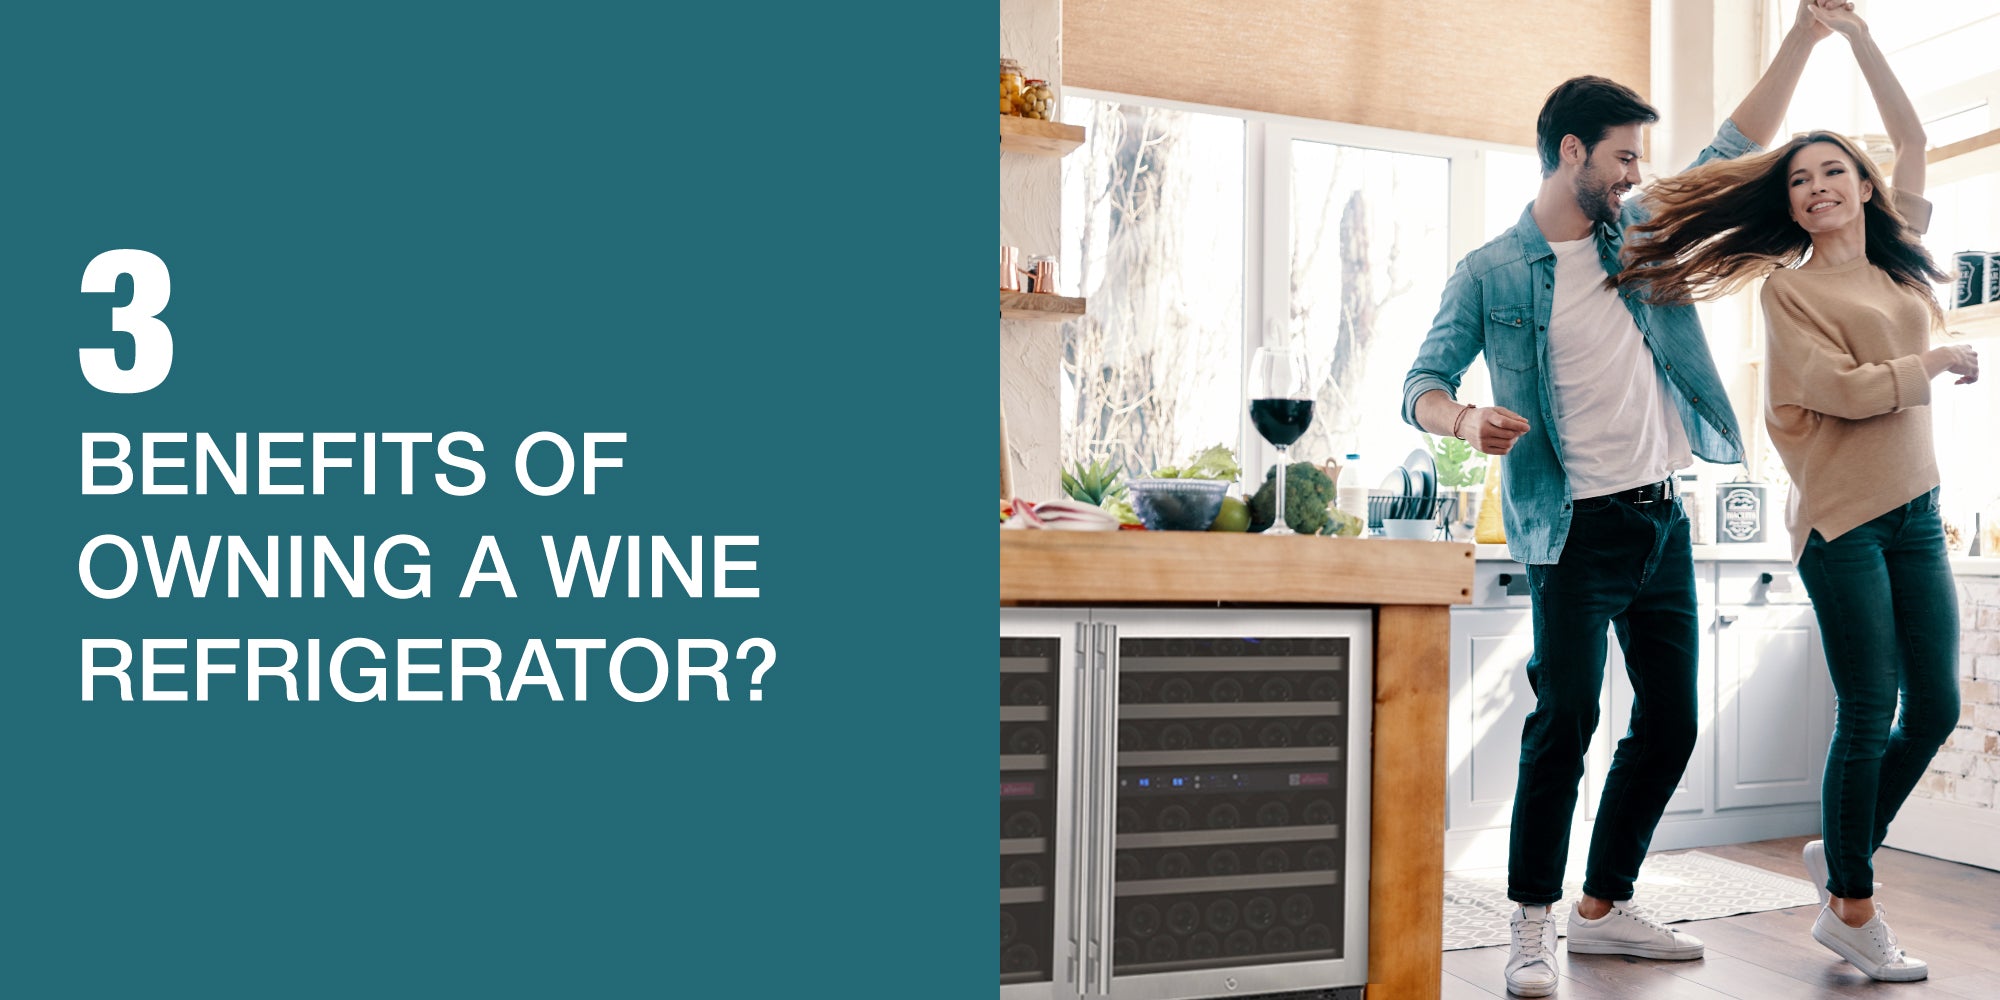 Benefits of owning a wine refrigerator?